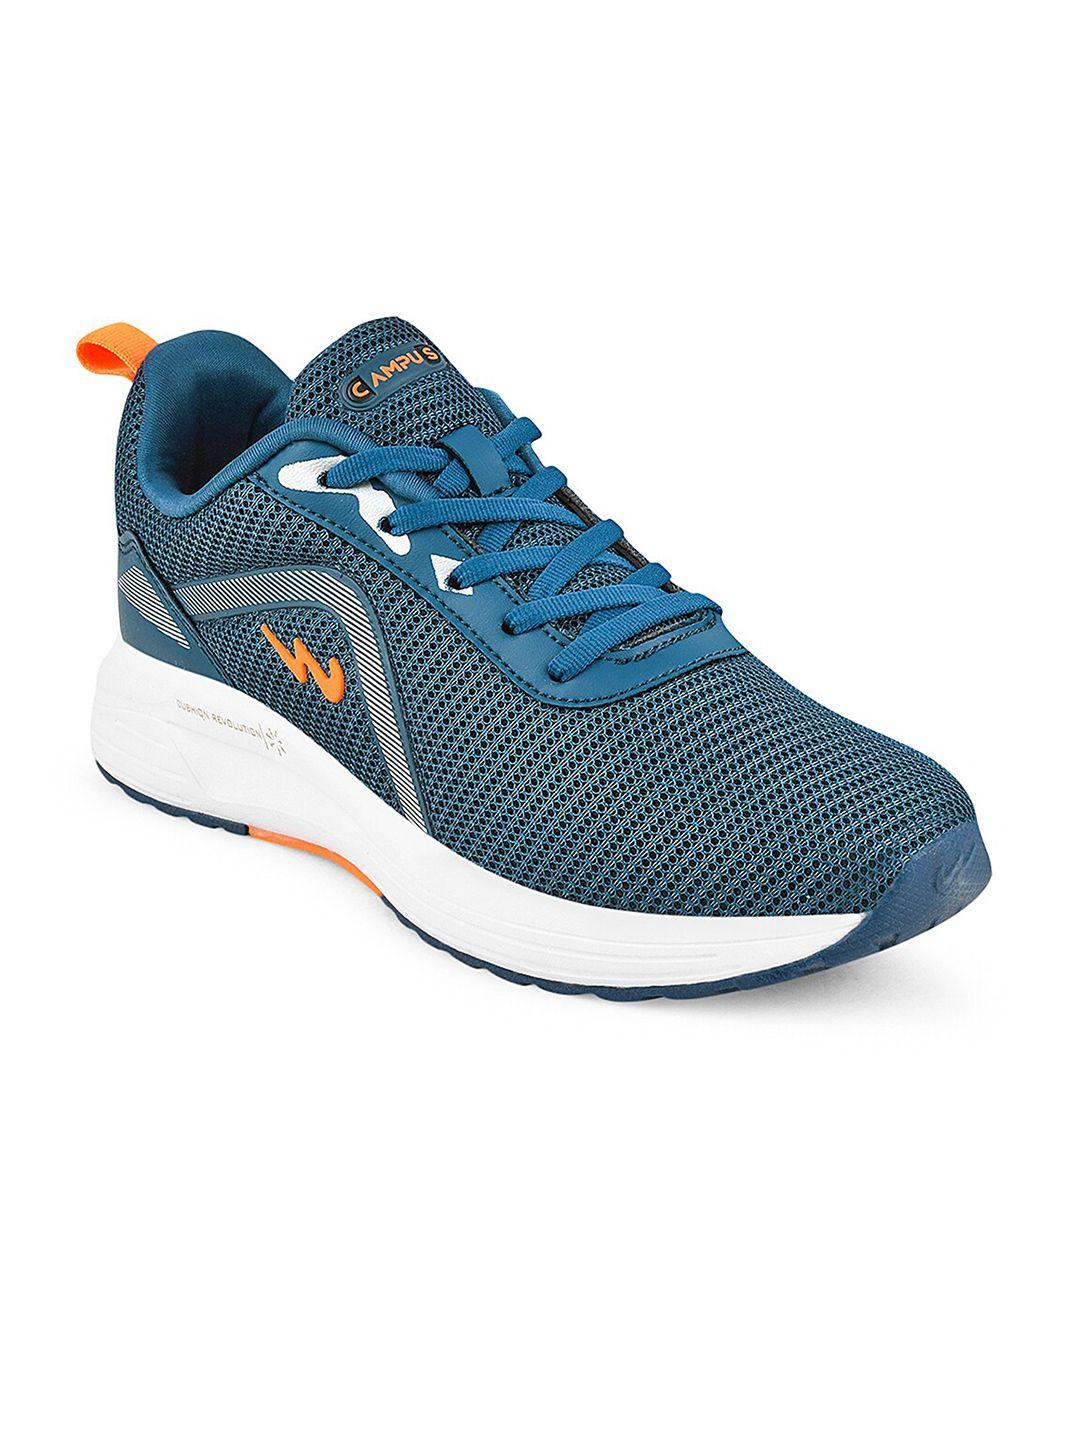 campus men road running sports shoes